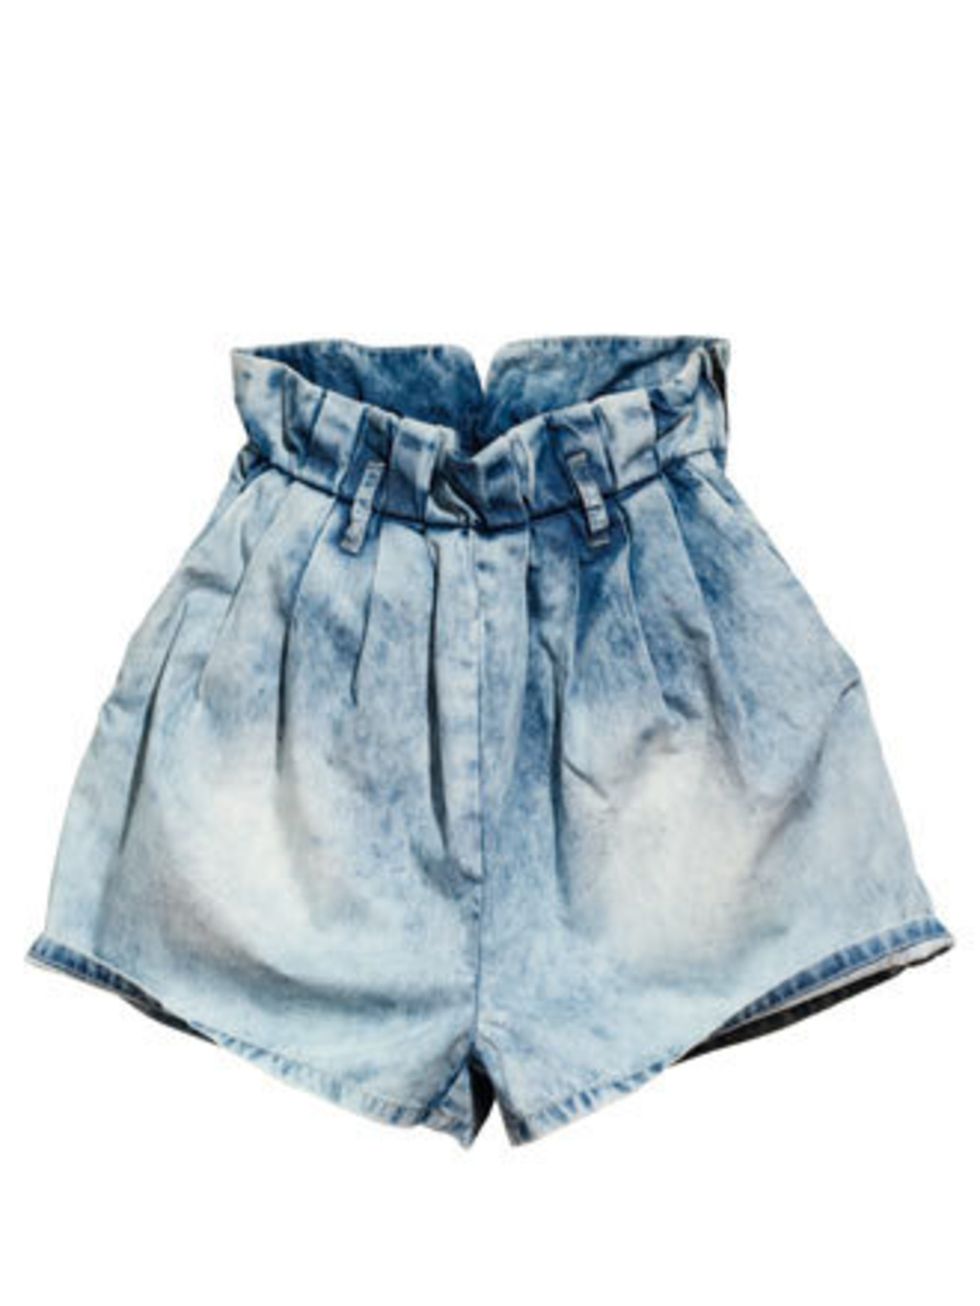 <p>This Thursday H&amp;M launches its third Fashion Against Aids collection, with 25% of the sales donated to youth HIV/AIDS awareness projects. These shorts are sure to become a wardrobe staple this summer.</p><p>Shorts, £14.99 by <a href="http://www.fas